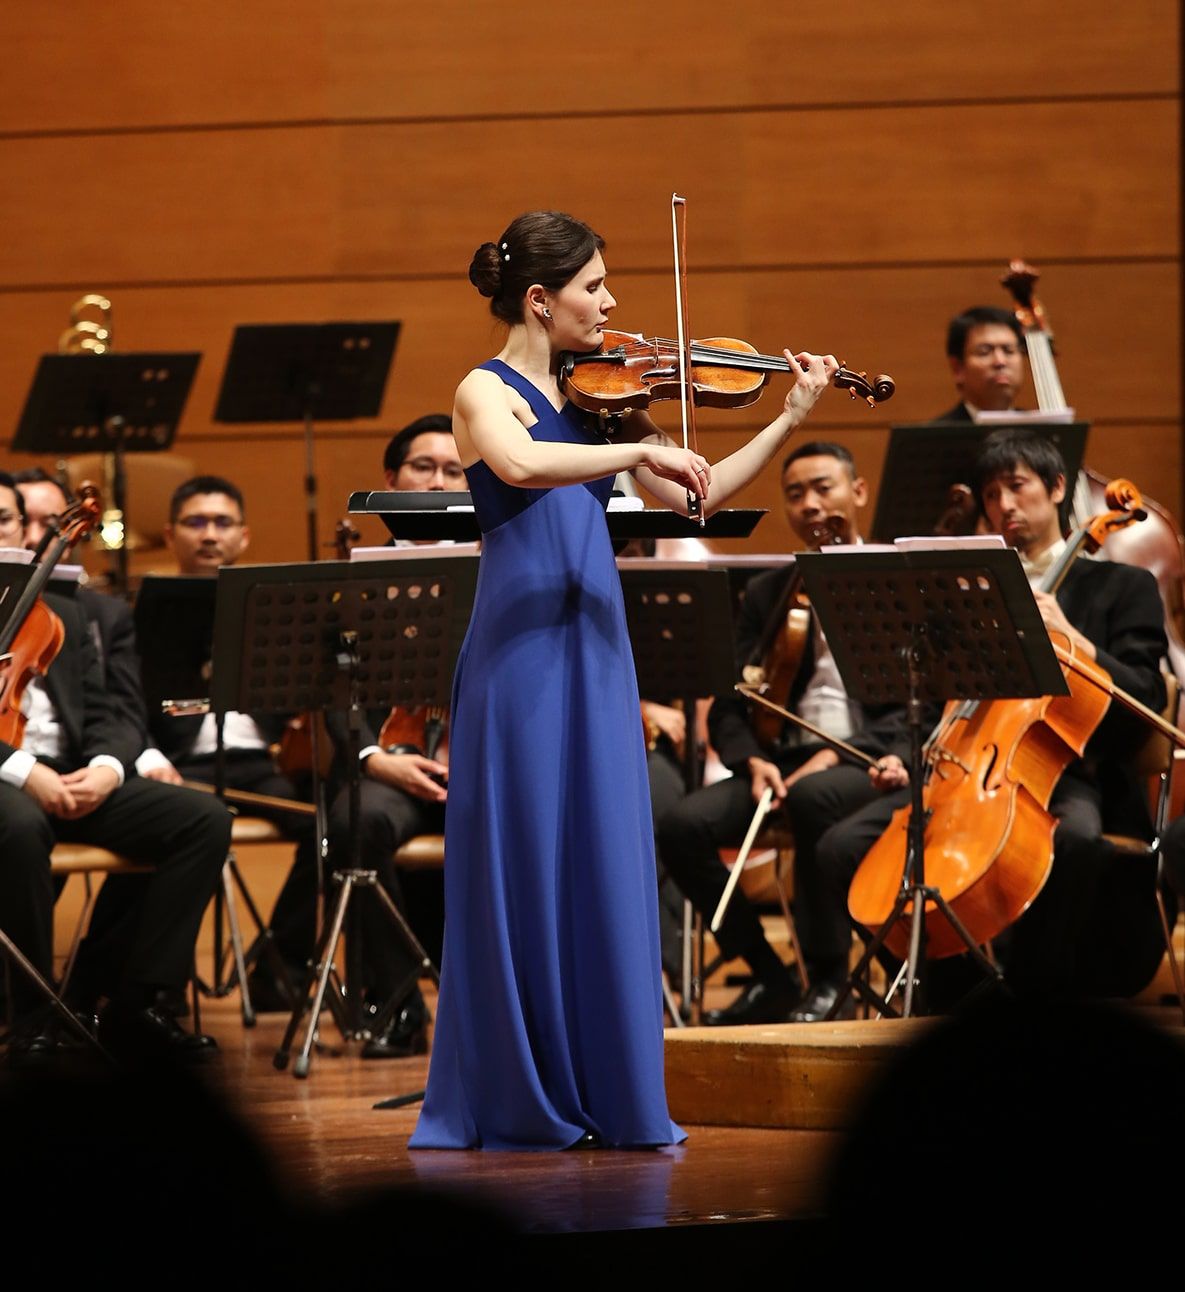 The first major concert of the RBSO's 2019 season